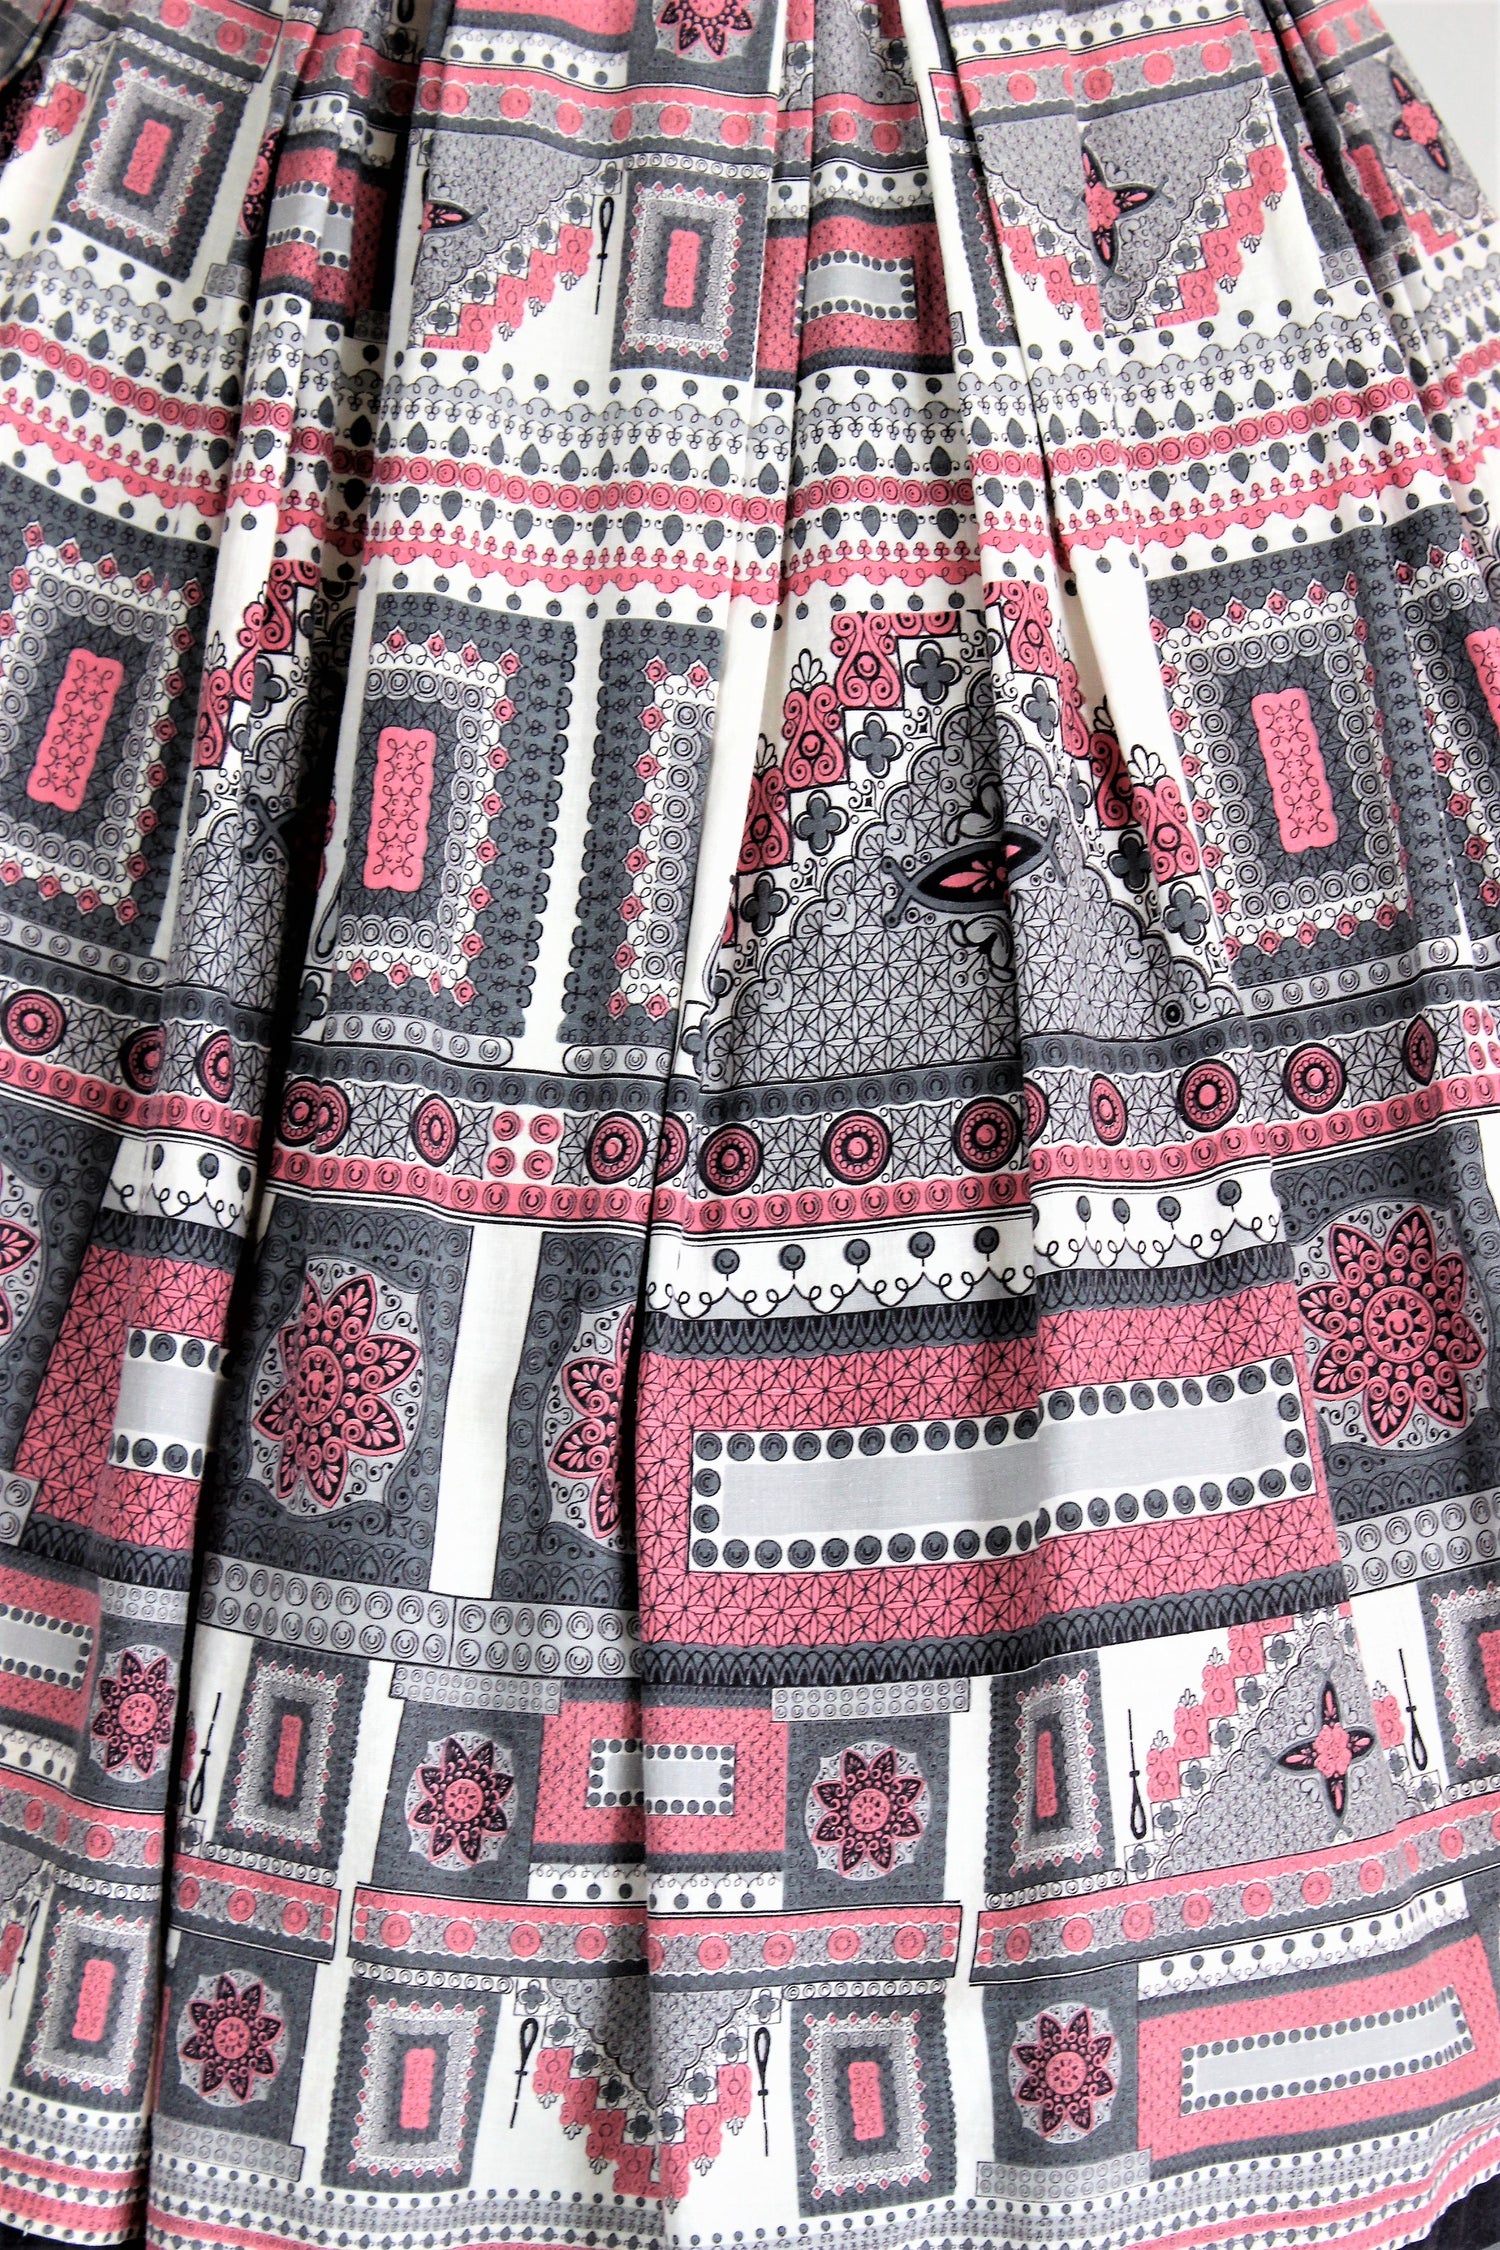 Vintage 1950s Full Skirt Novelty Print in Pink Black Gray And White Cotton